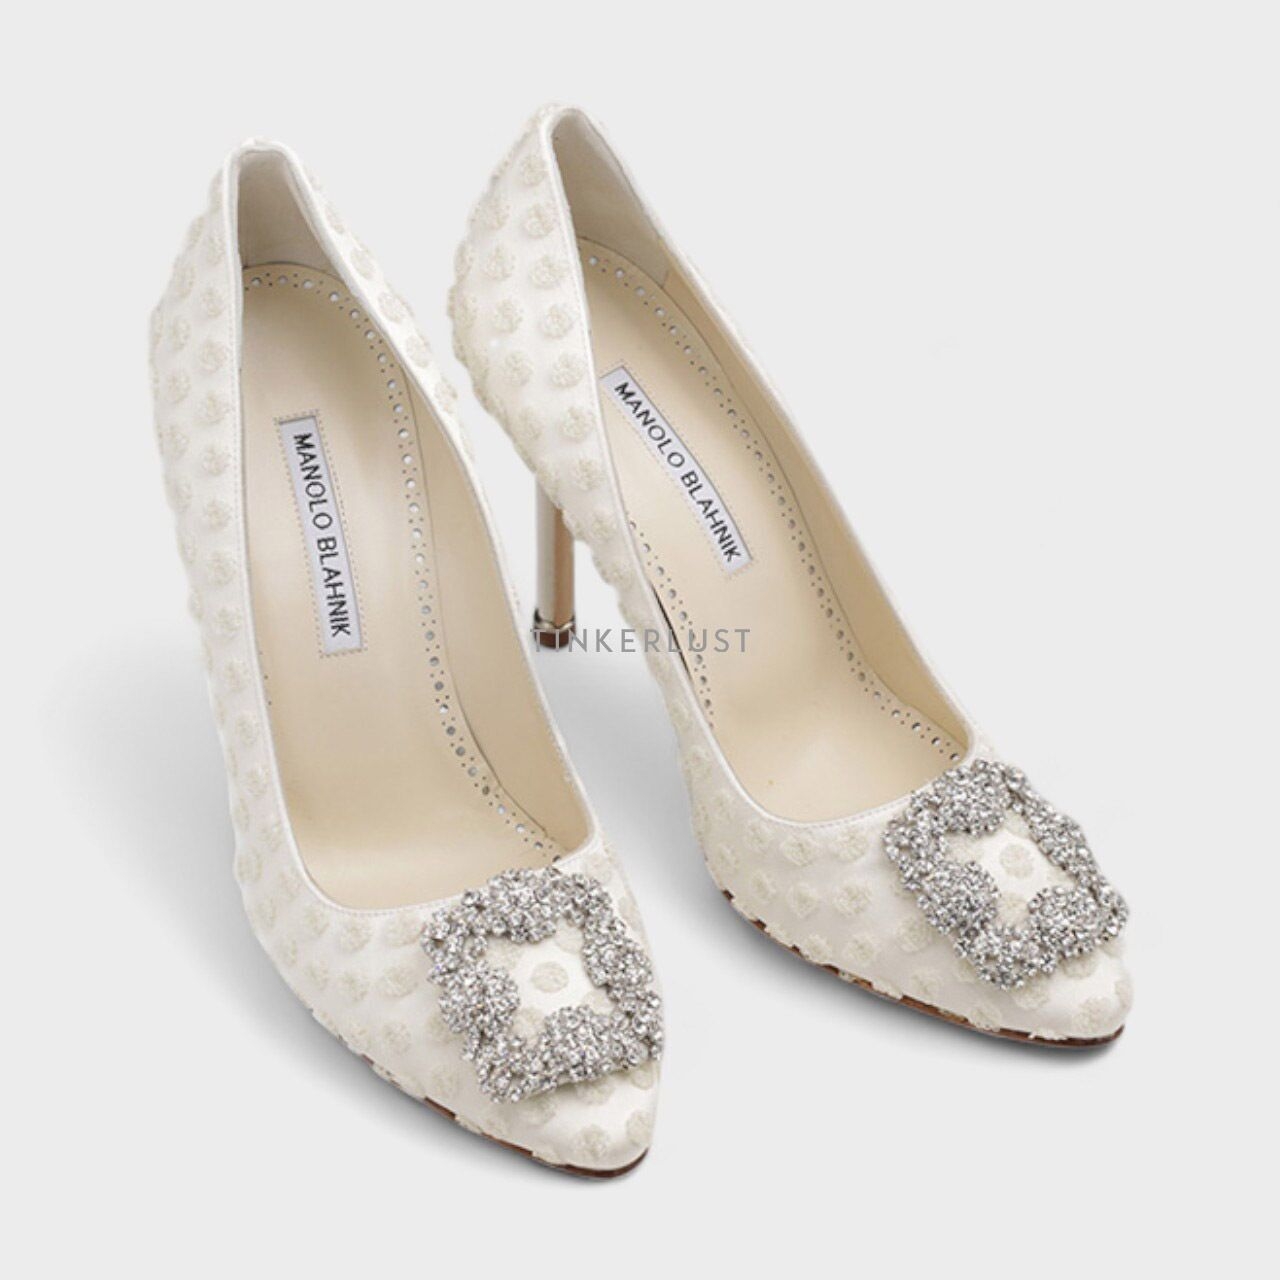 Manolo Blahnik Hangisi Embroidered Pumps 10.5cm in White Satin with White Crystal Heels